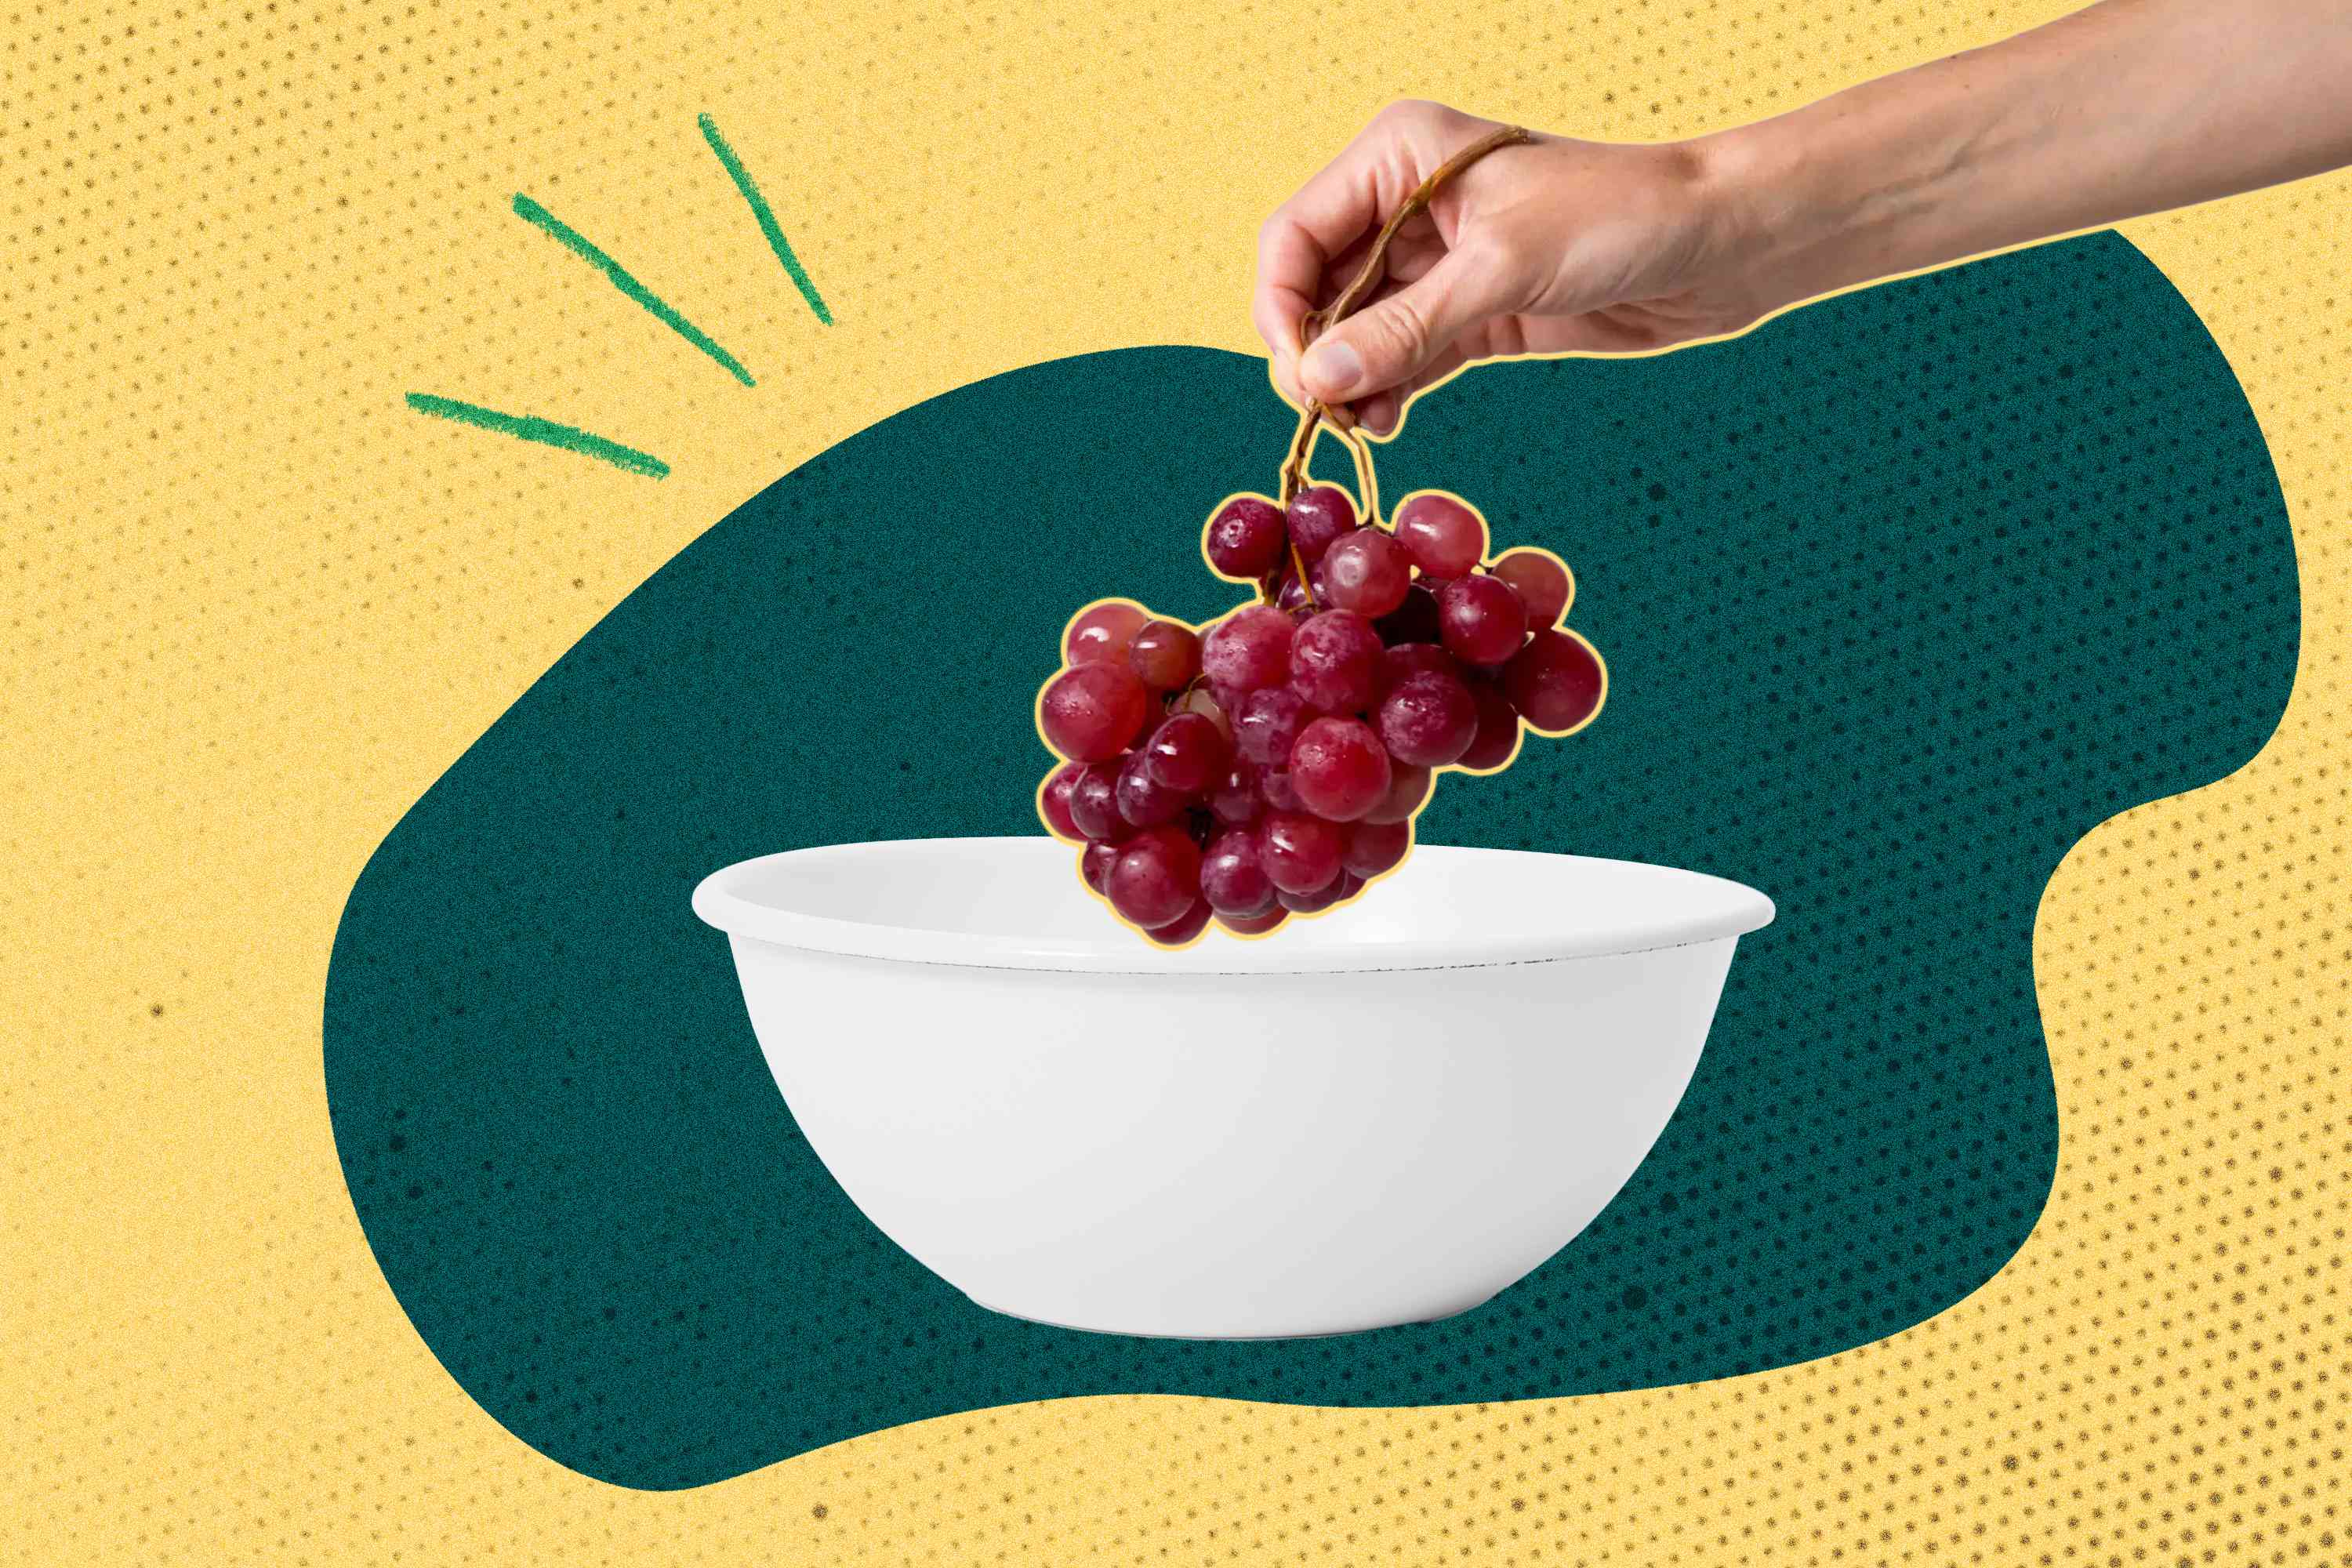 The Only Way You Should Store Grapes, According to a Food Expert